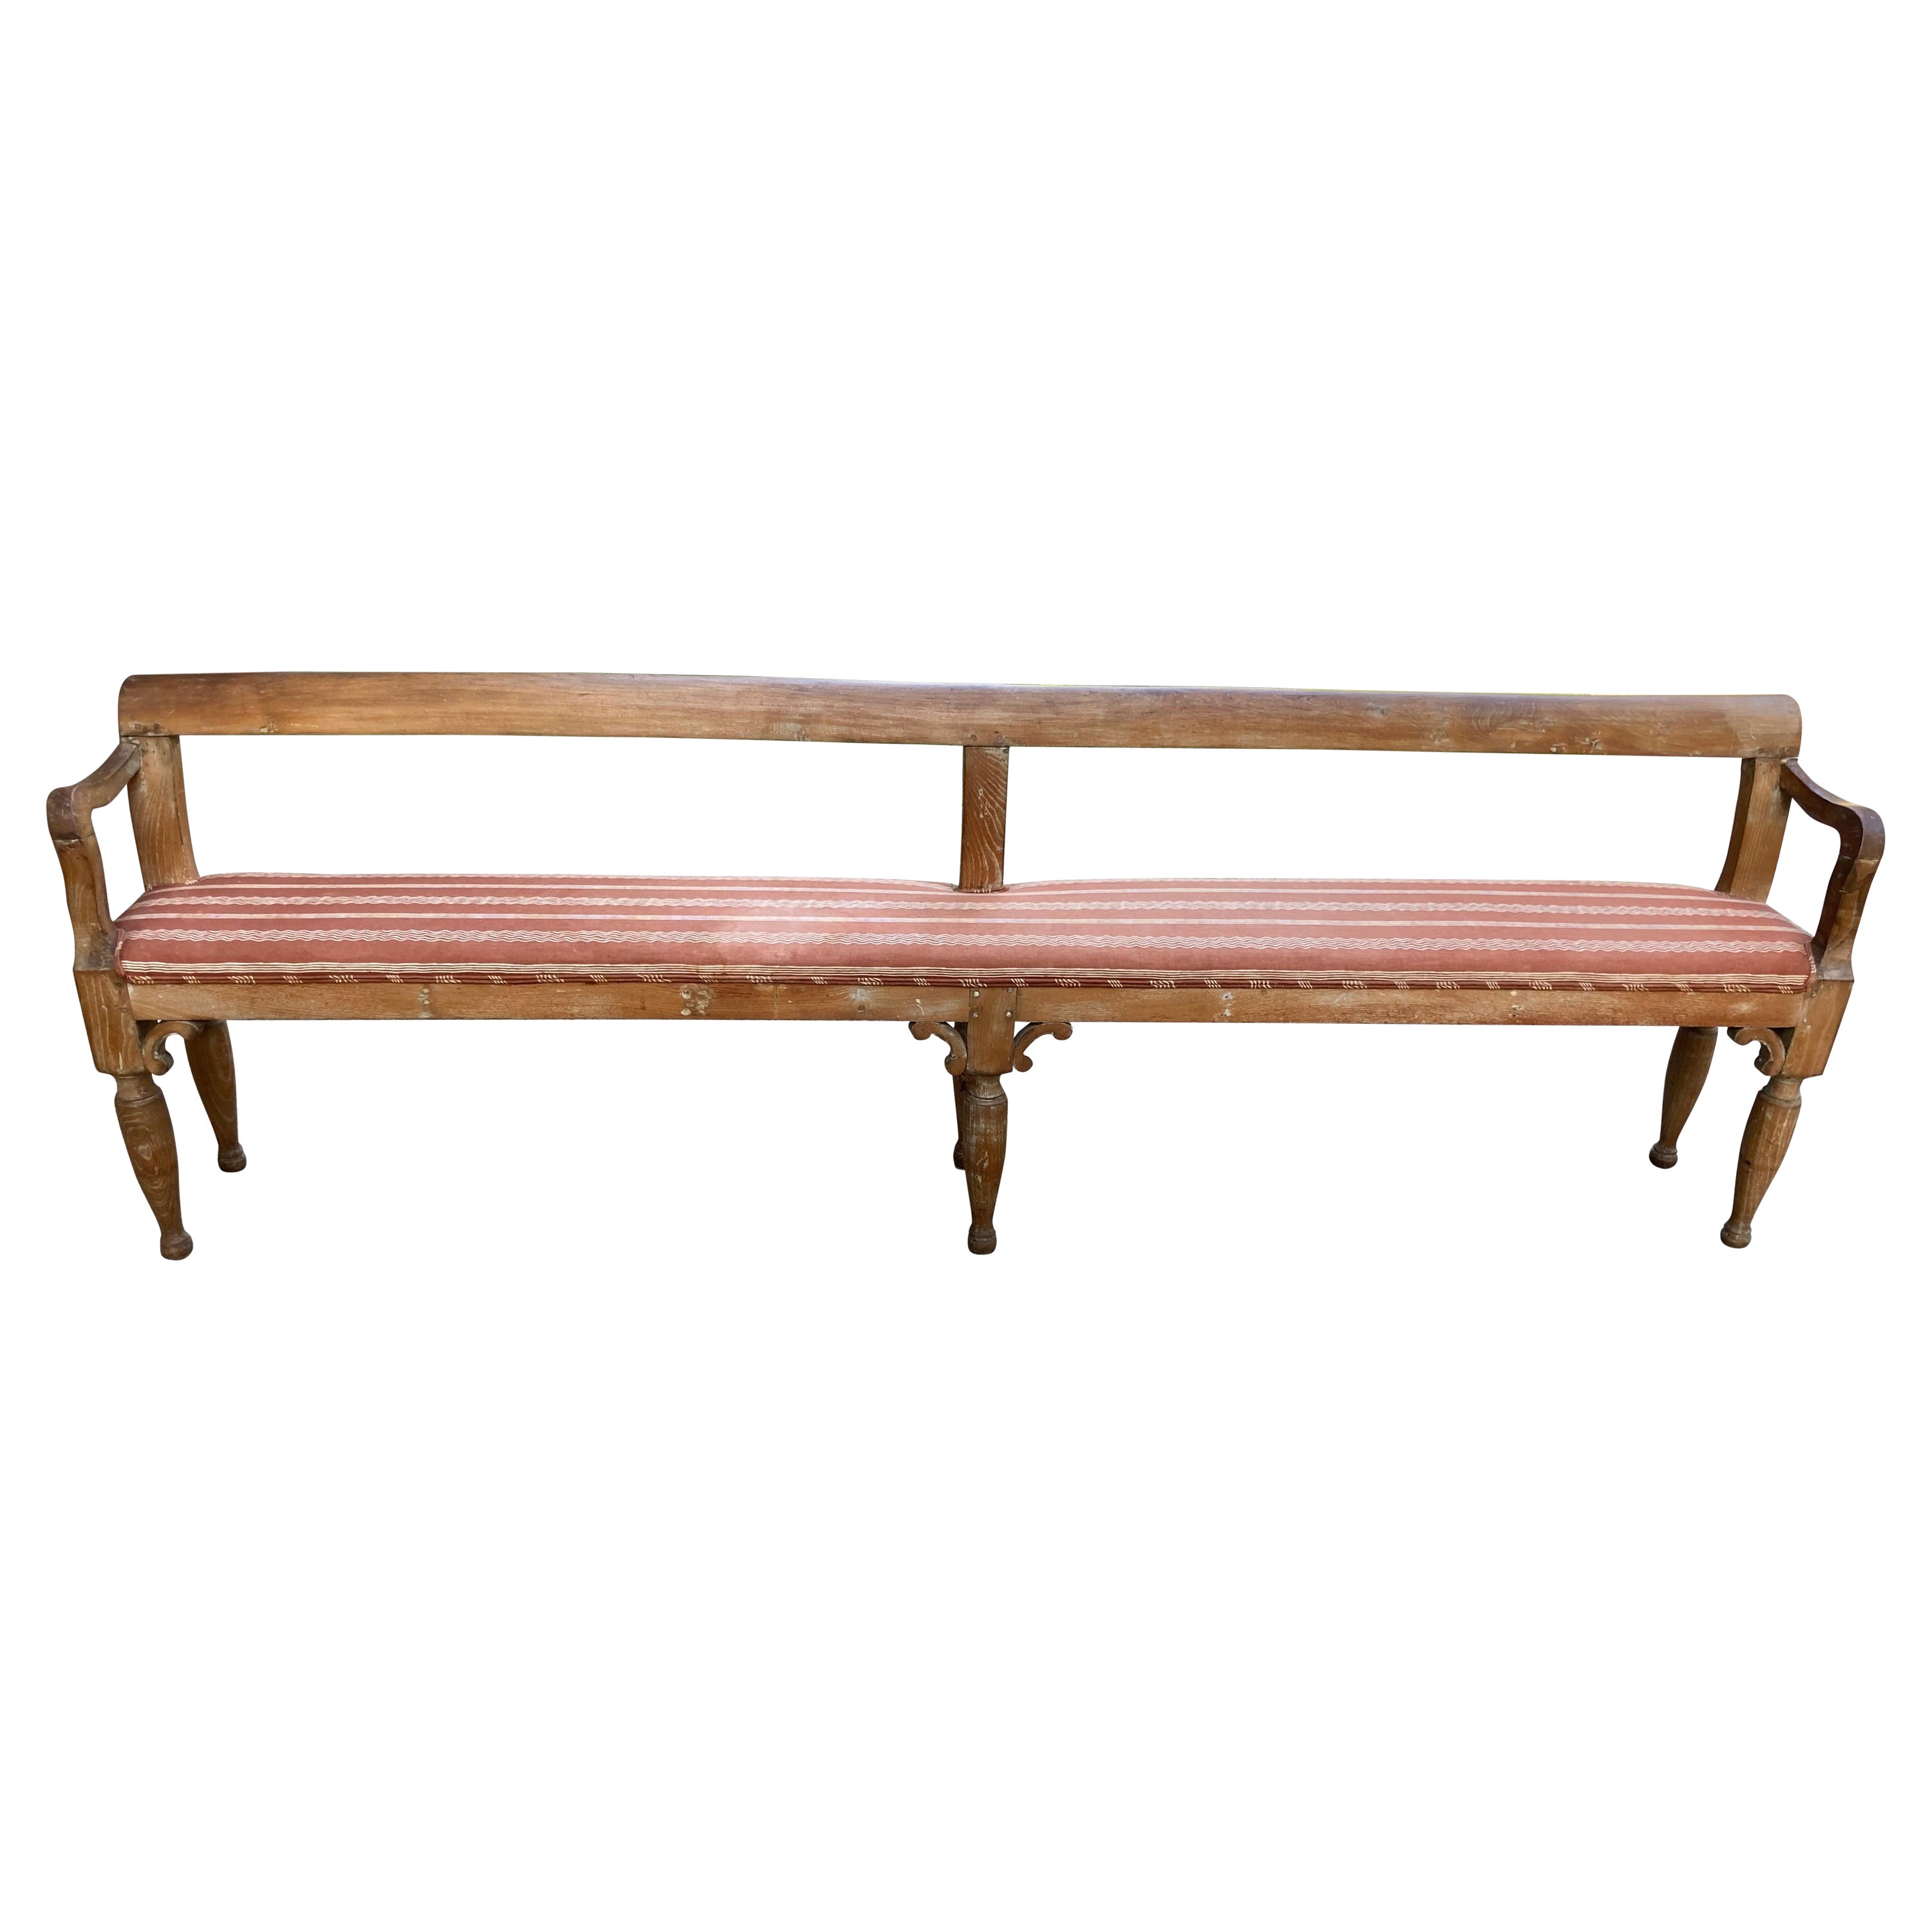 Very Long Upholstered Rustic Bench